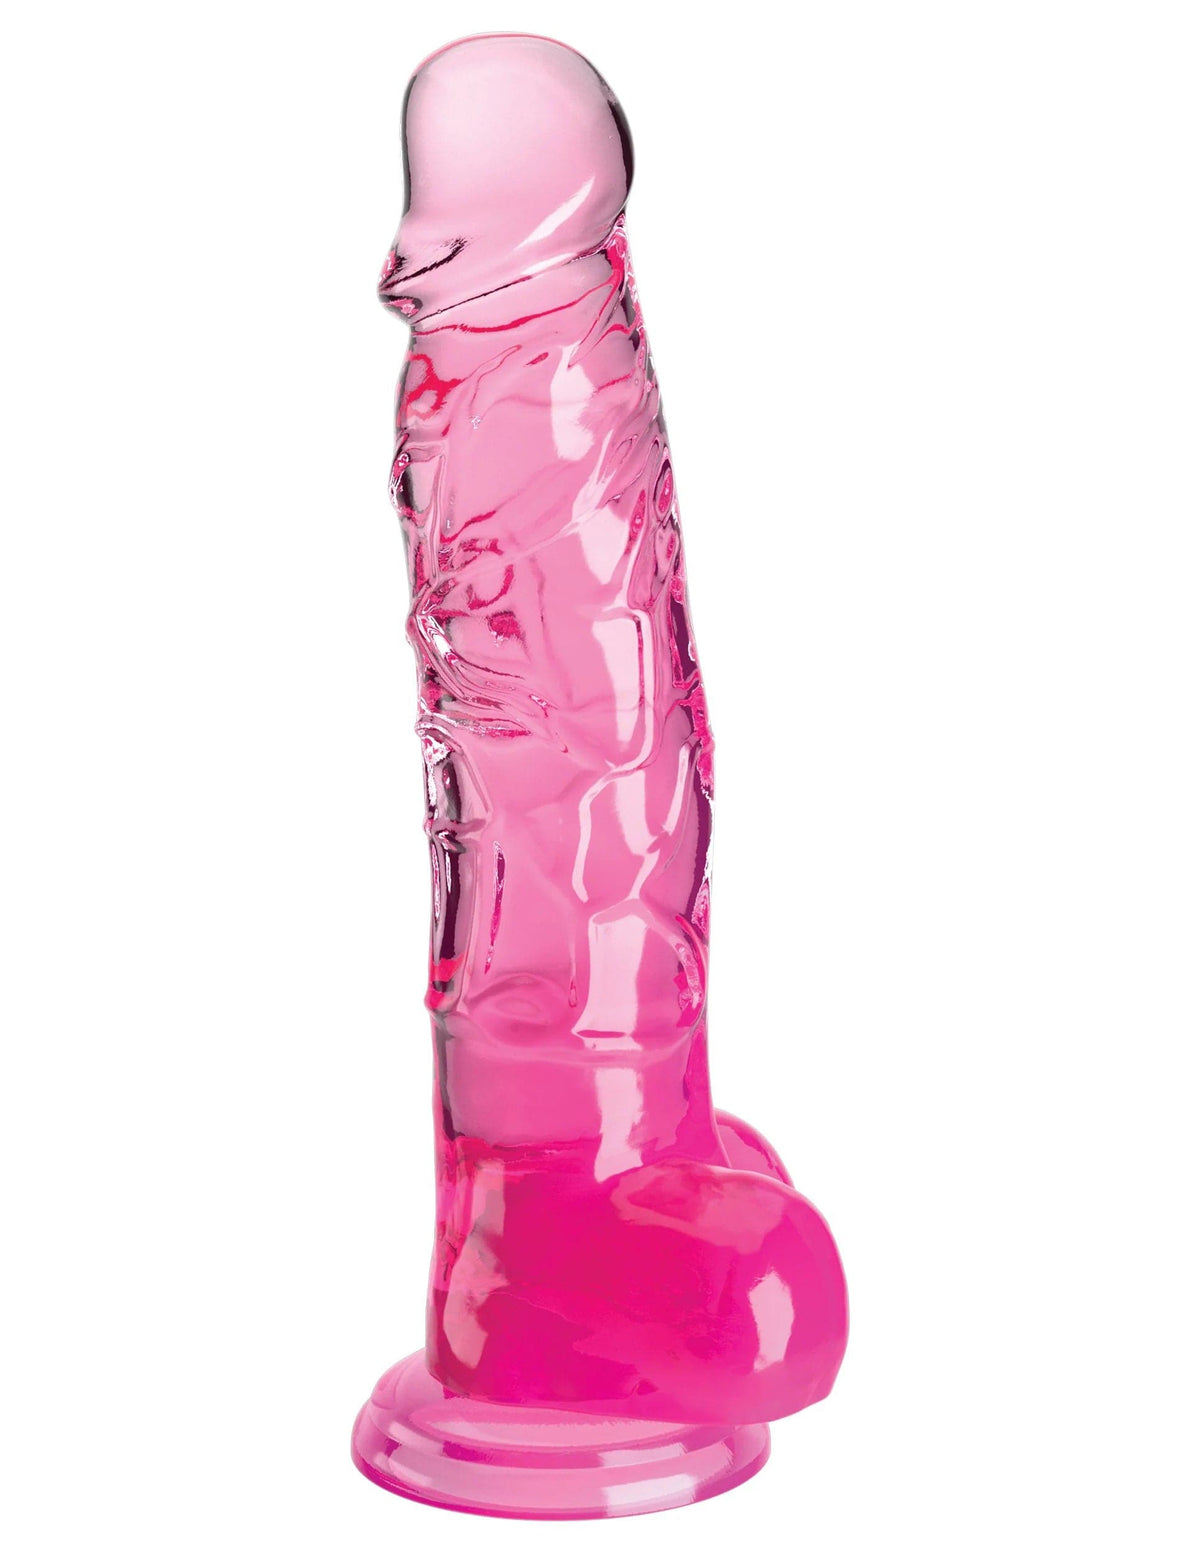 king cock clear 8 inch with balls pink